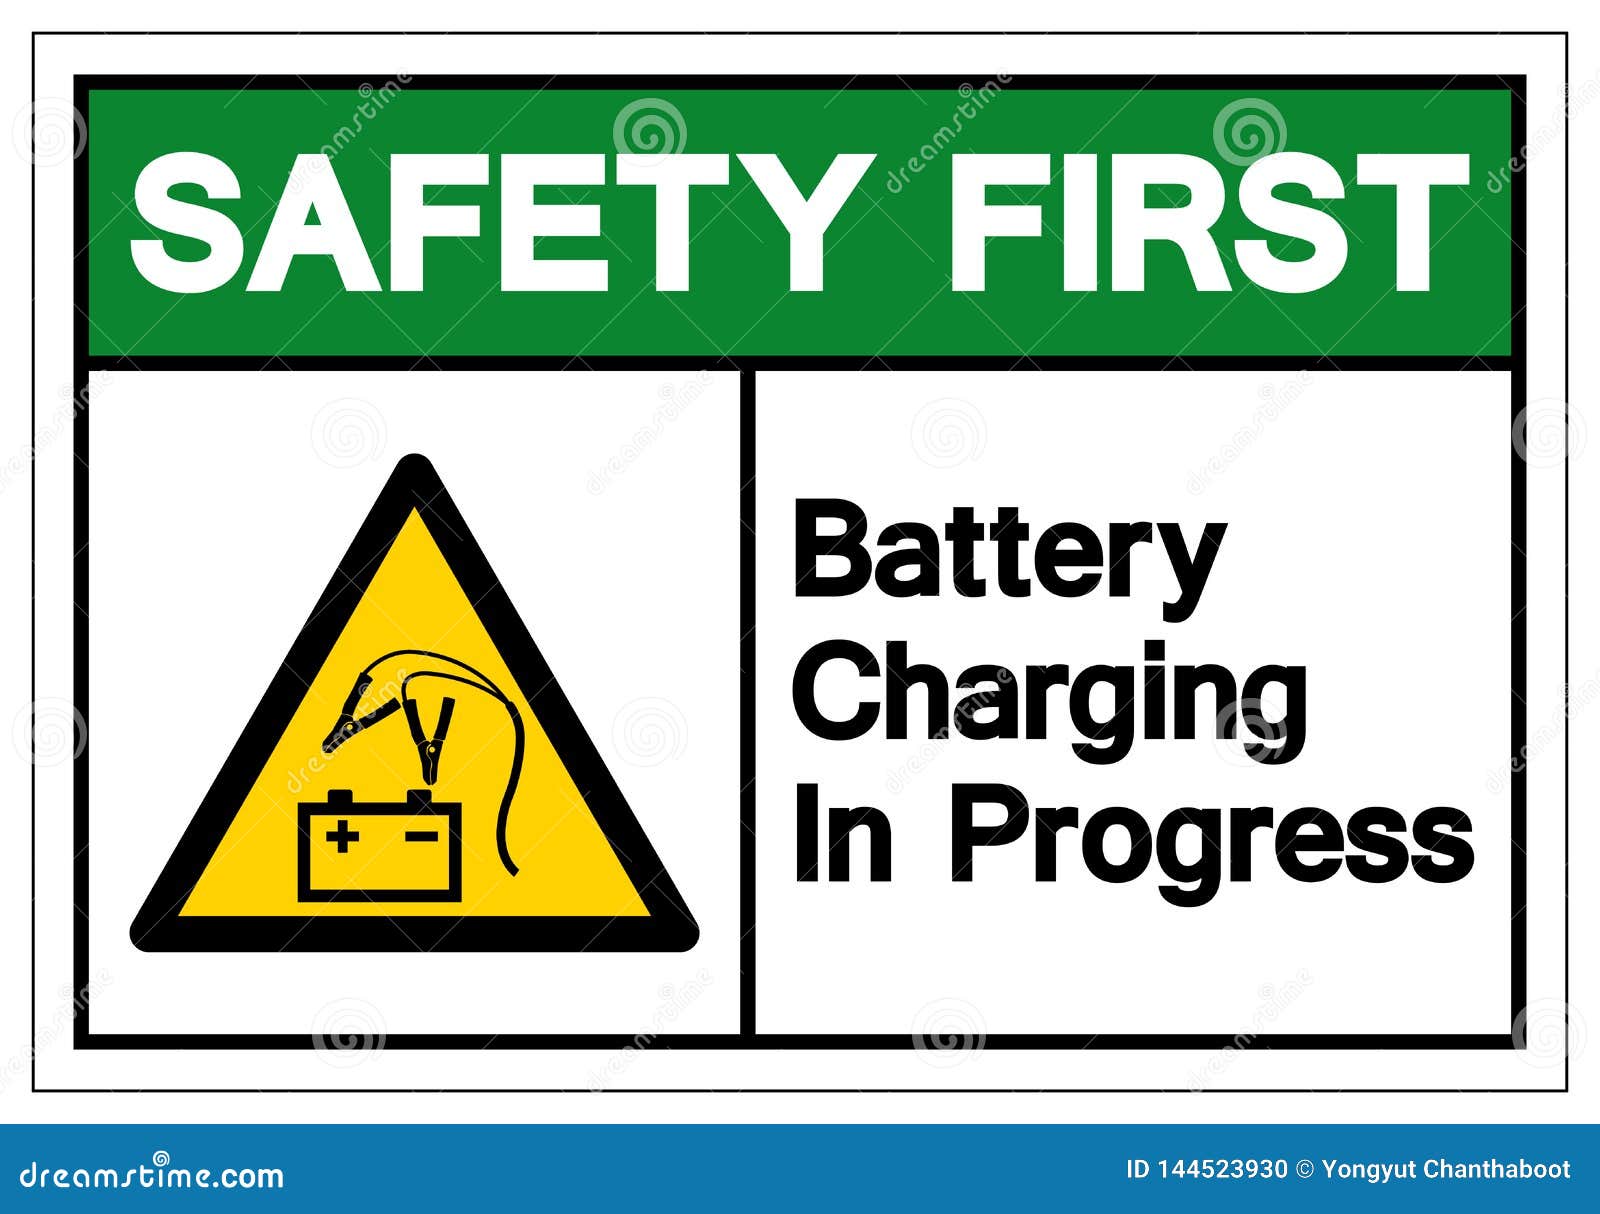 BATTERY CHARGING IN PROGRESS Sign Sticker Vinyl Health and safety 300mm x 100mm 